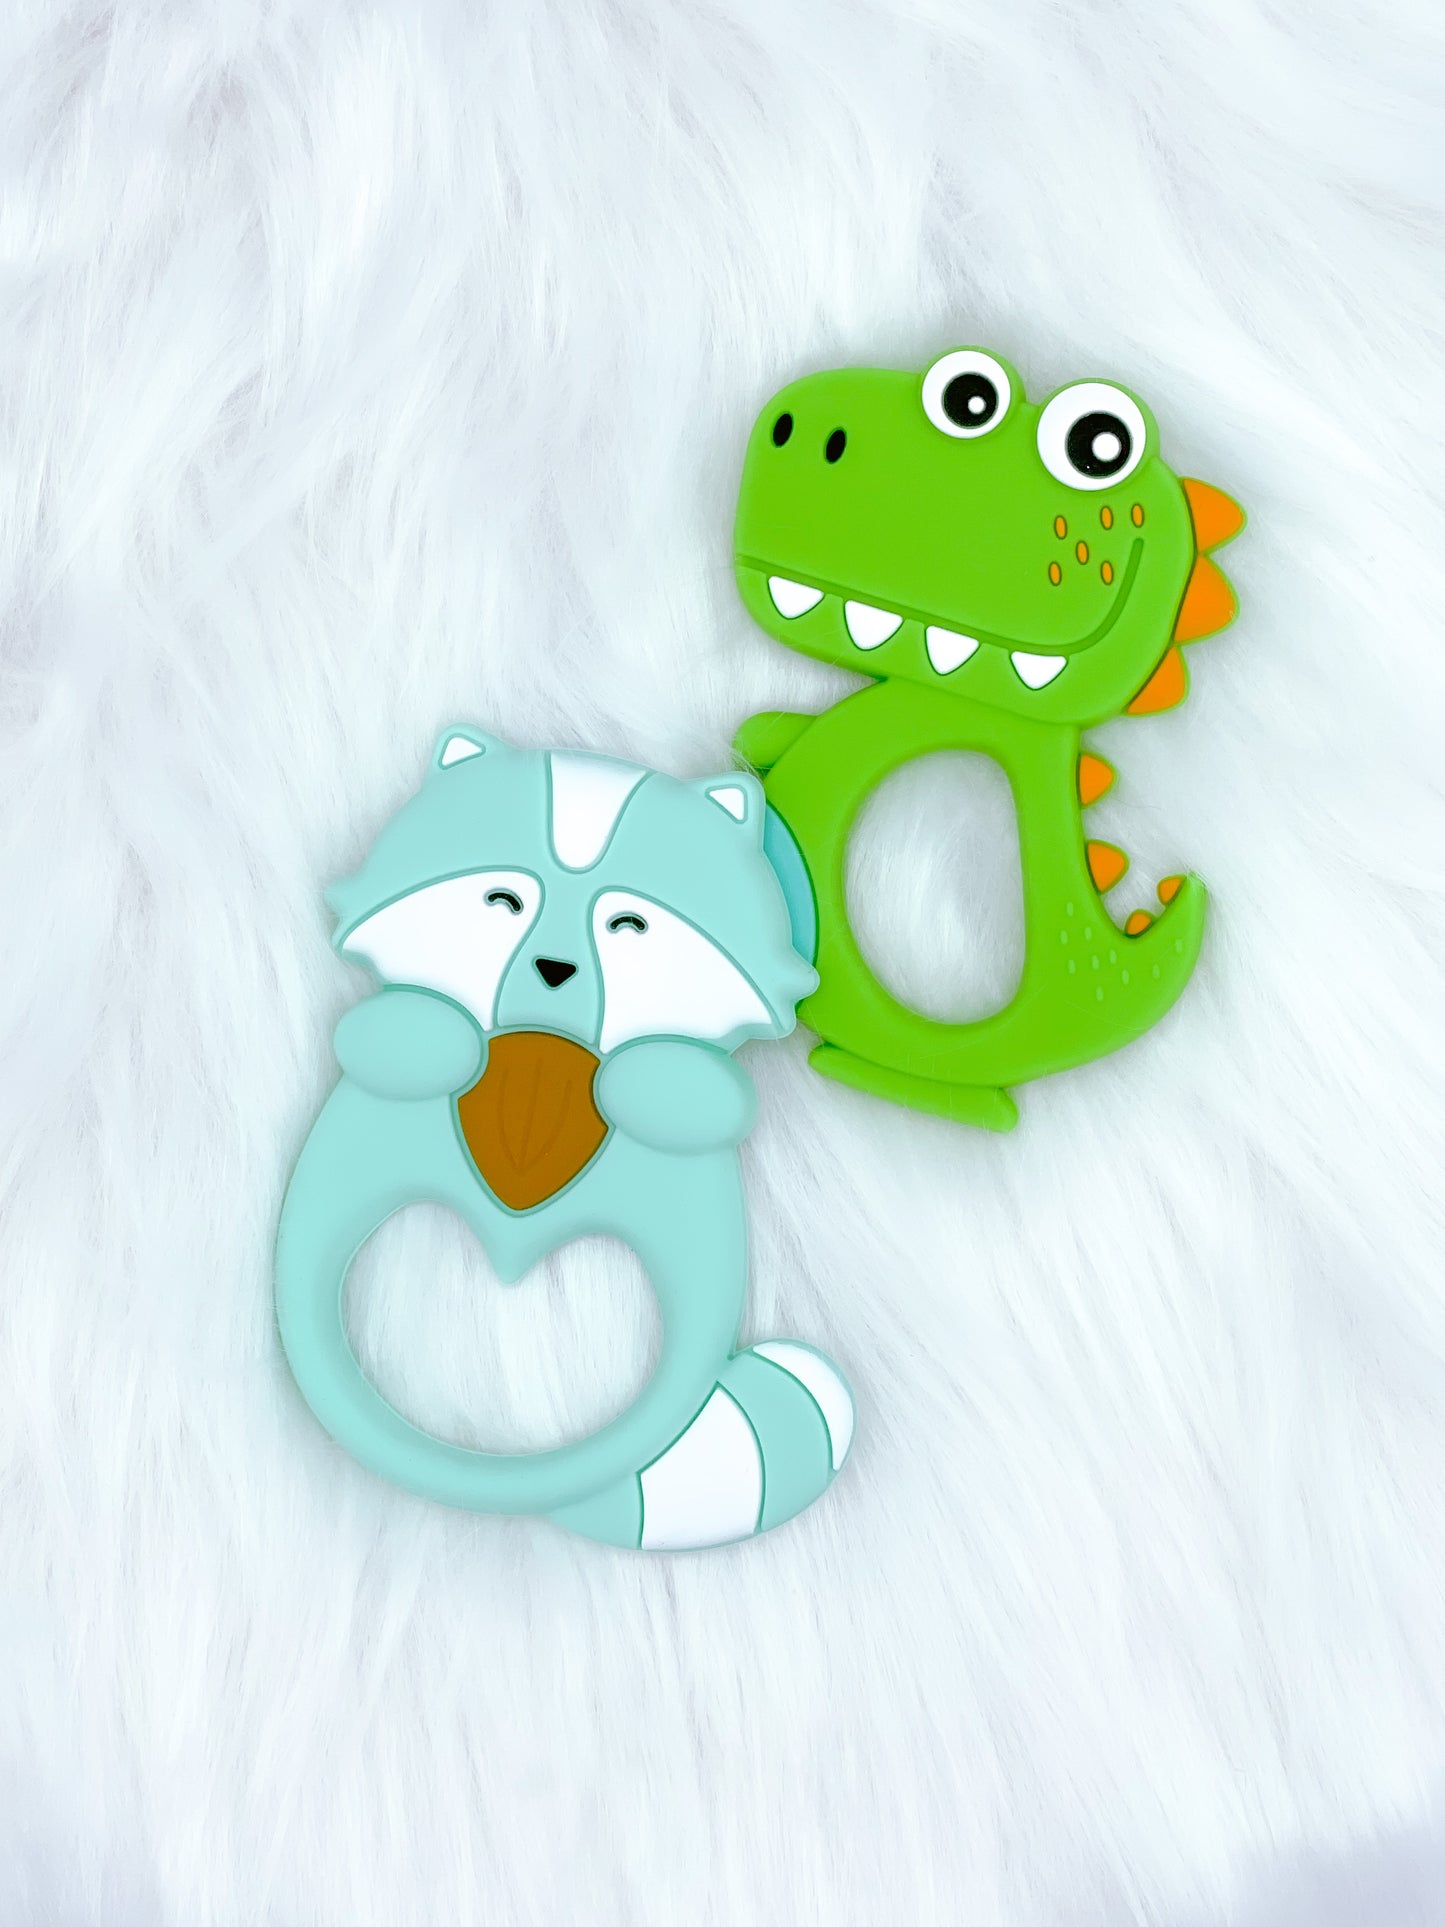 Racoon and Dino Teether Chew Toy Bundle - 2 piece set